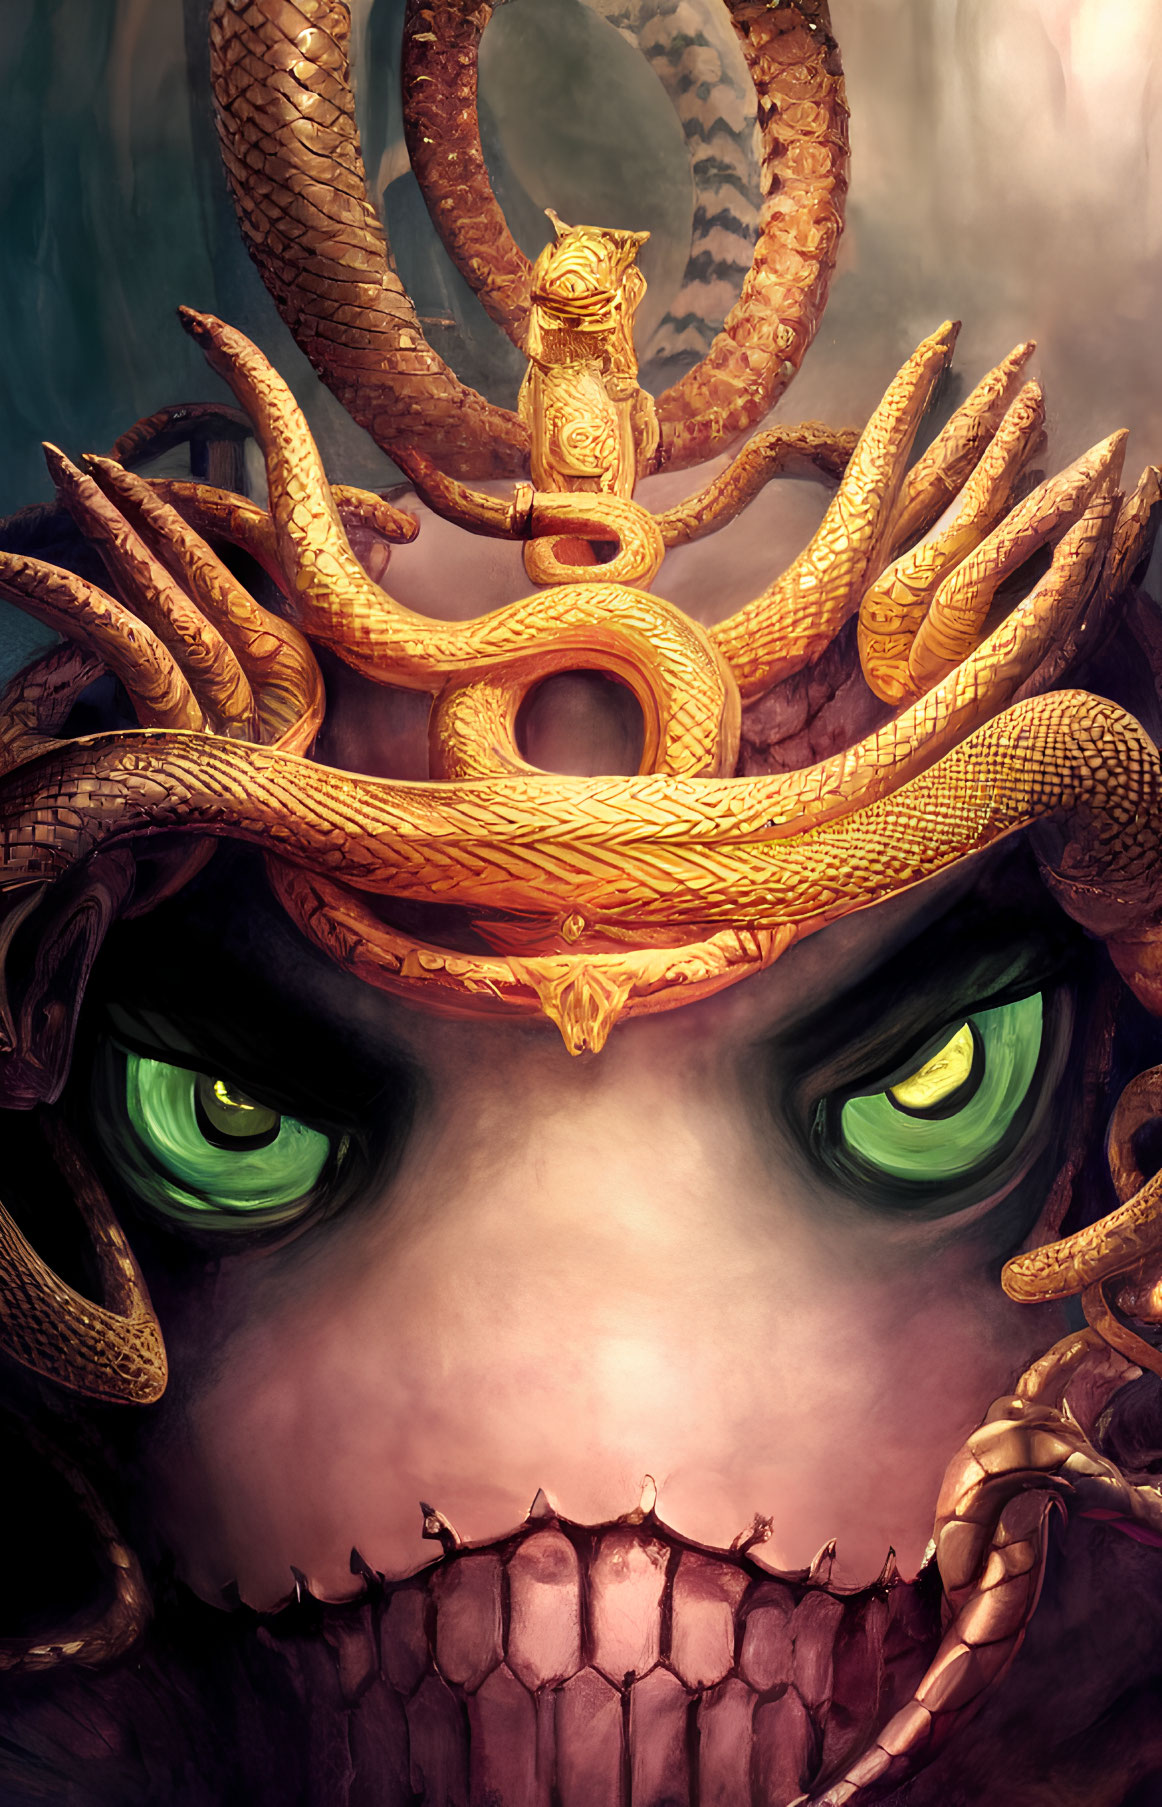 Fantasy illustration of a creature with green eyes and ornate golden crown.